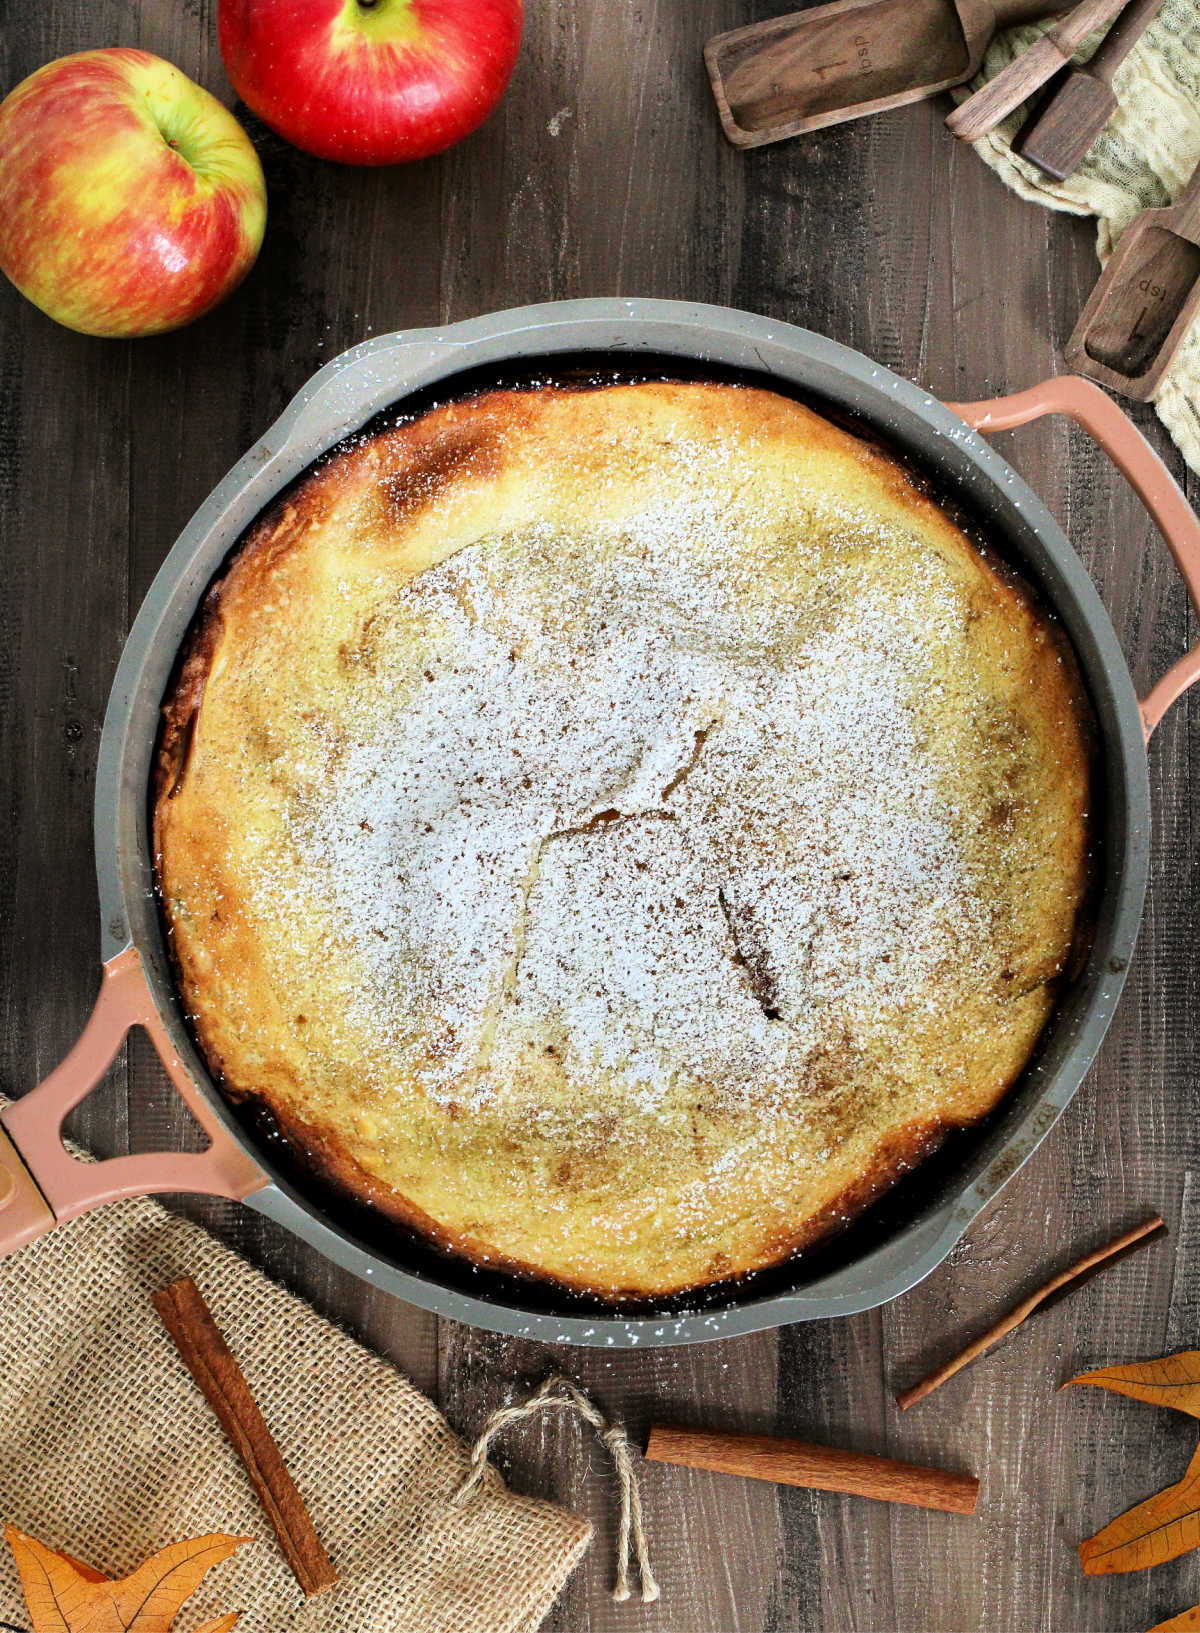 An Apple Dutch Baby in a pan on a wooden board surrounded by apples, cinnamon sticks and measuring spoons.